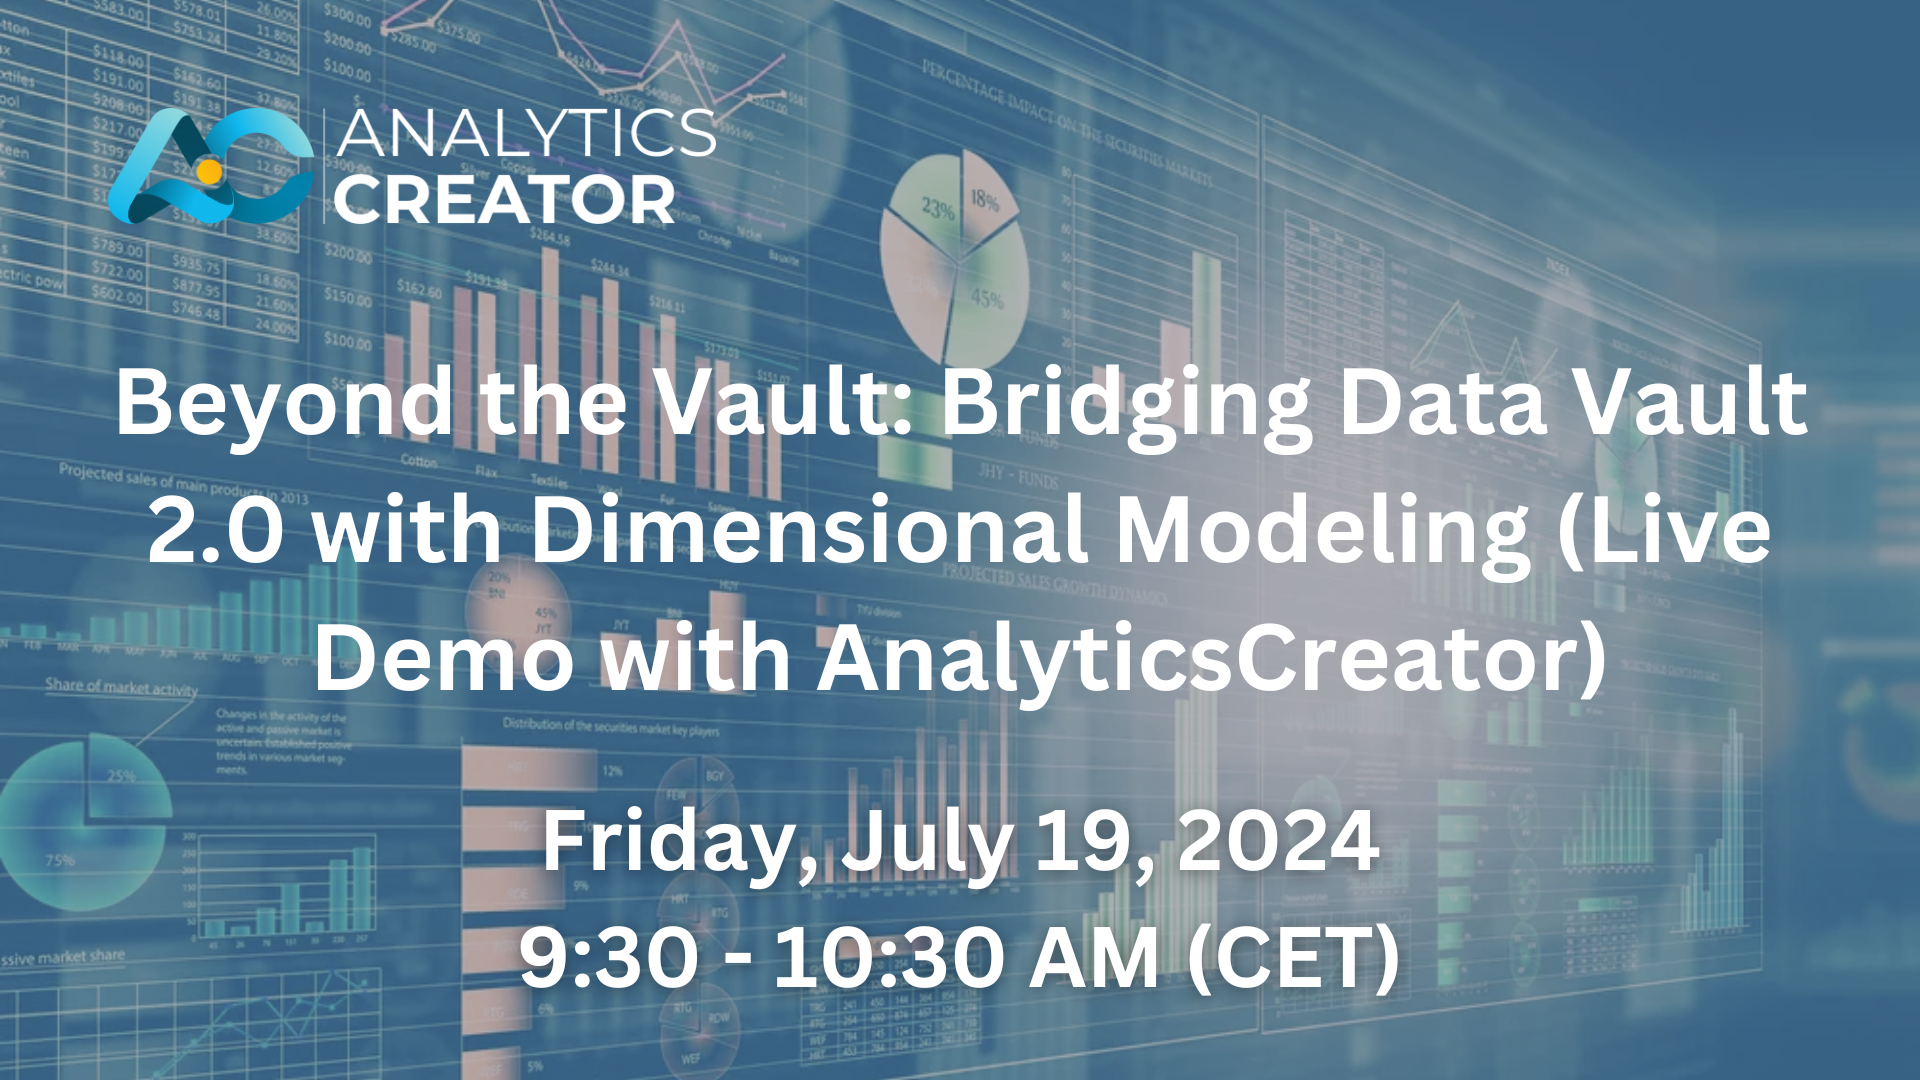 Beyond the Vault: Bridging Data Vault 2.0 with Dimensional Modeling (Live Demo with AnalyticsCreator)